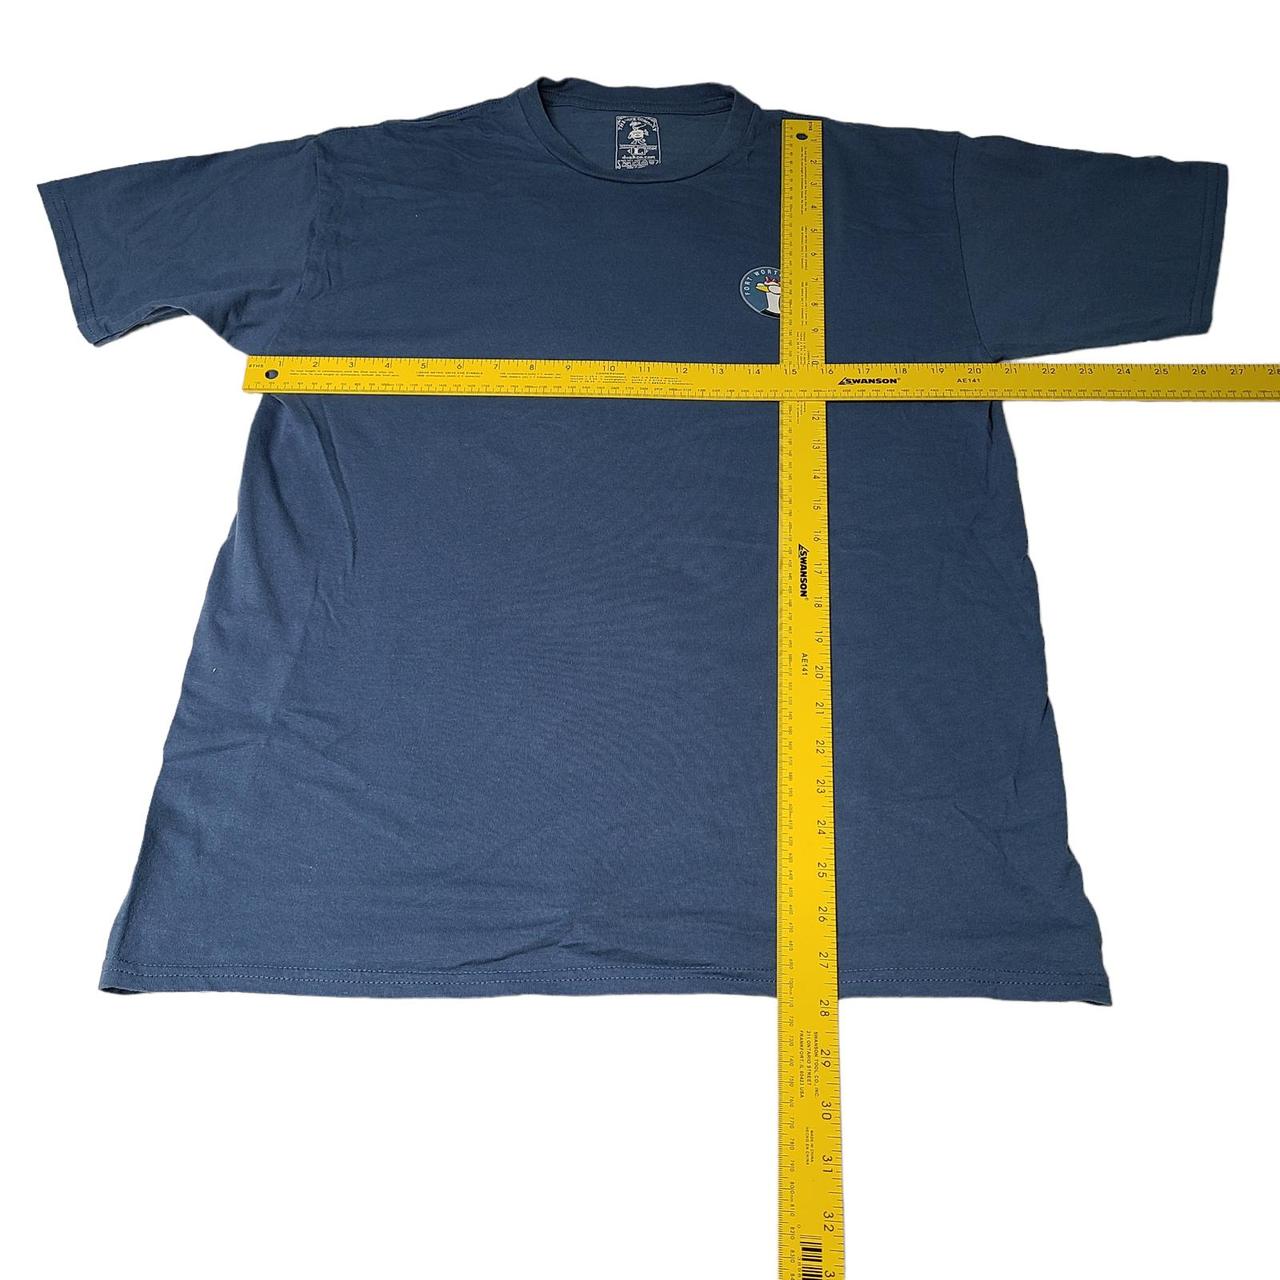 Duck and Cover Men's Blue T-shirt (4)